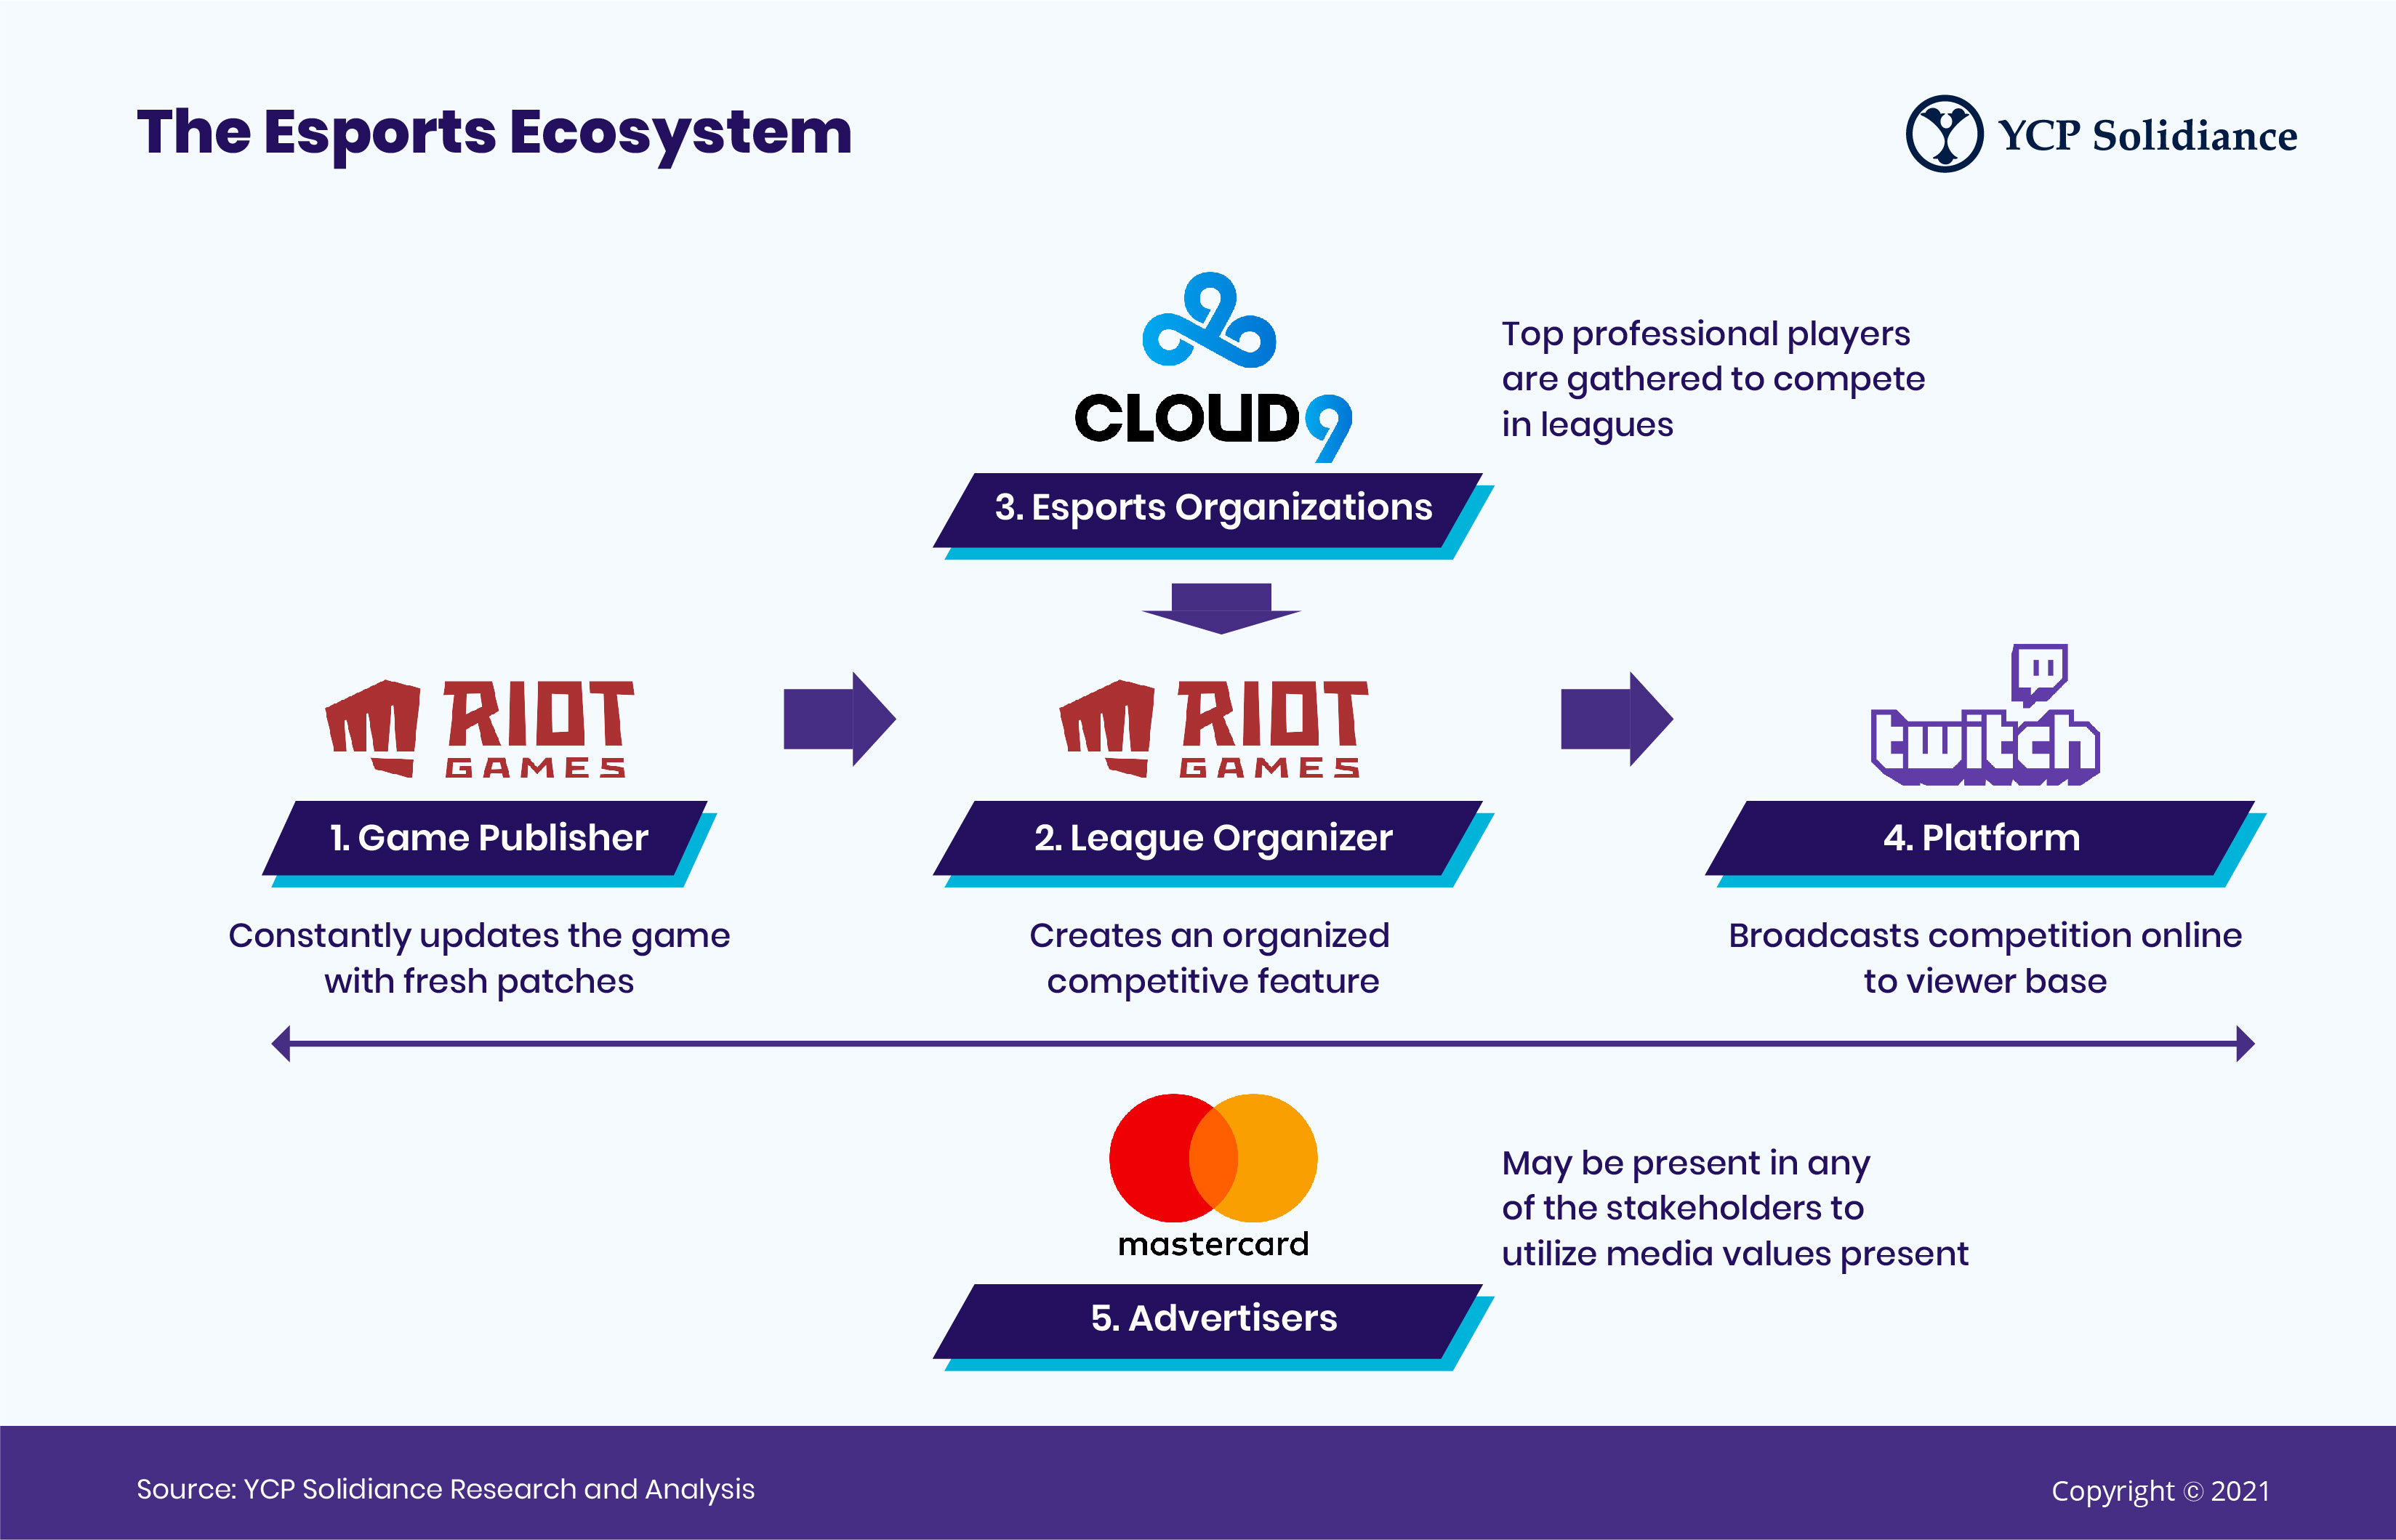 An Overview of the Esports Ecosystem